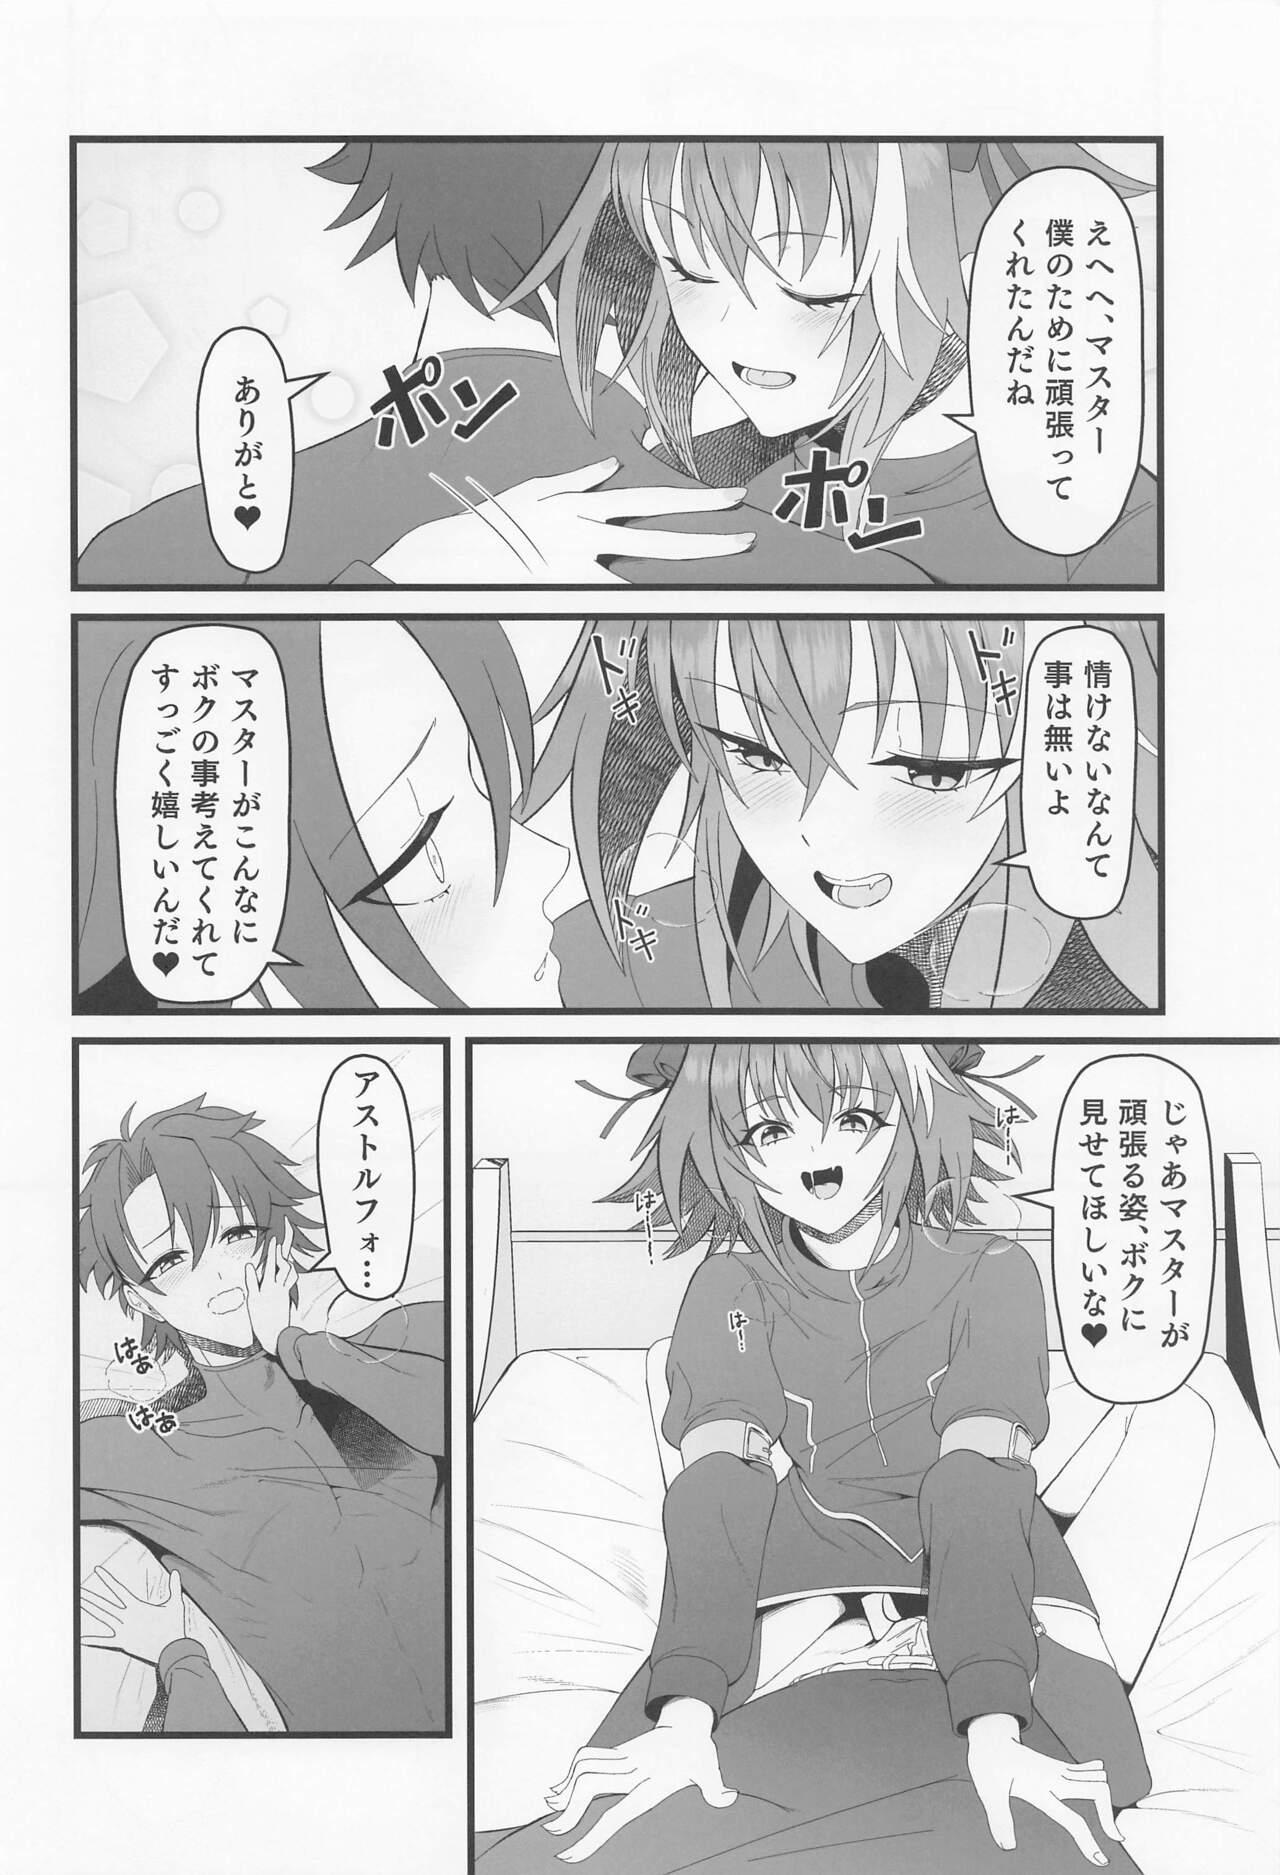 Arabe Kimi no Ichiban ni Naritakute - I wanted to be your number one. - Fate grand order Pigtails - Page 9